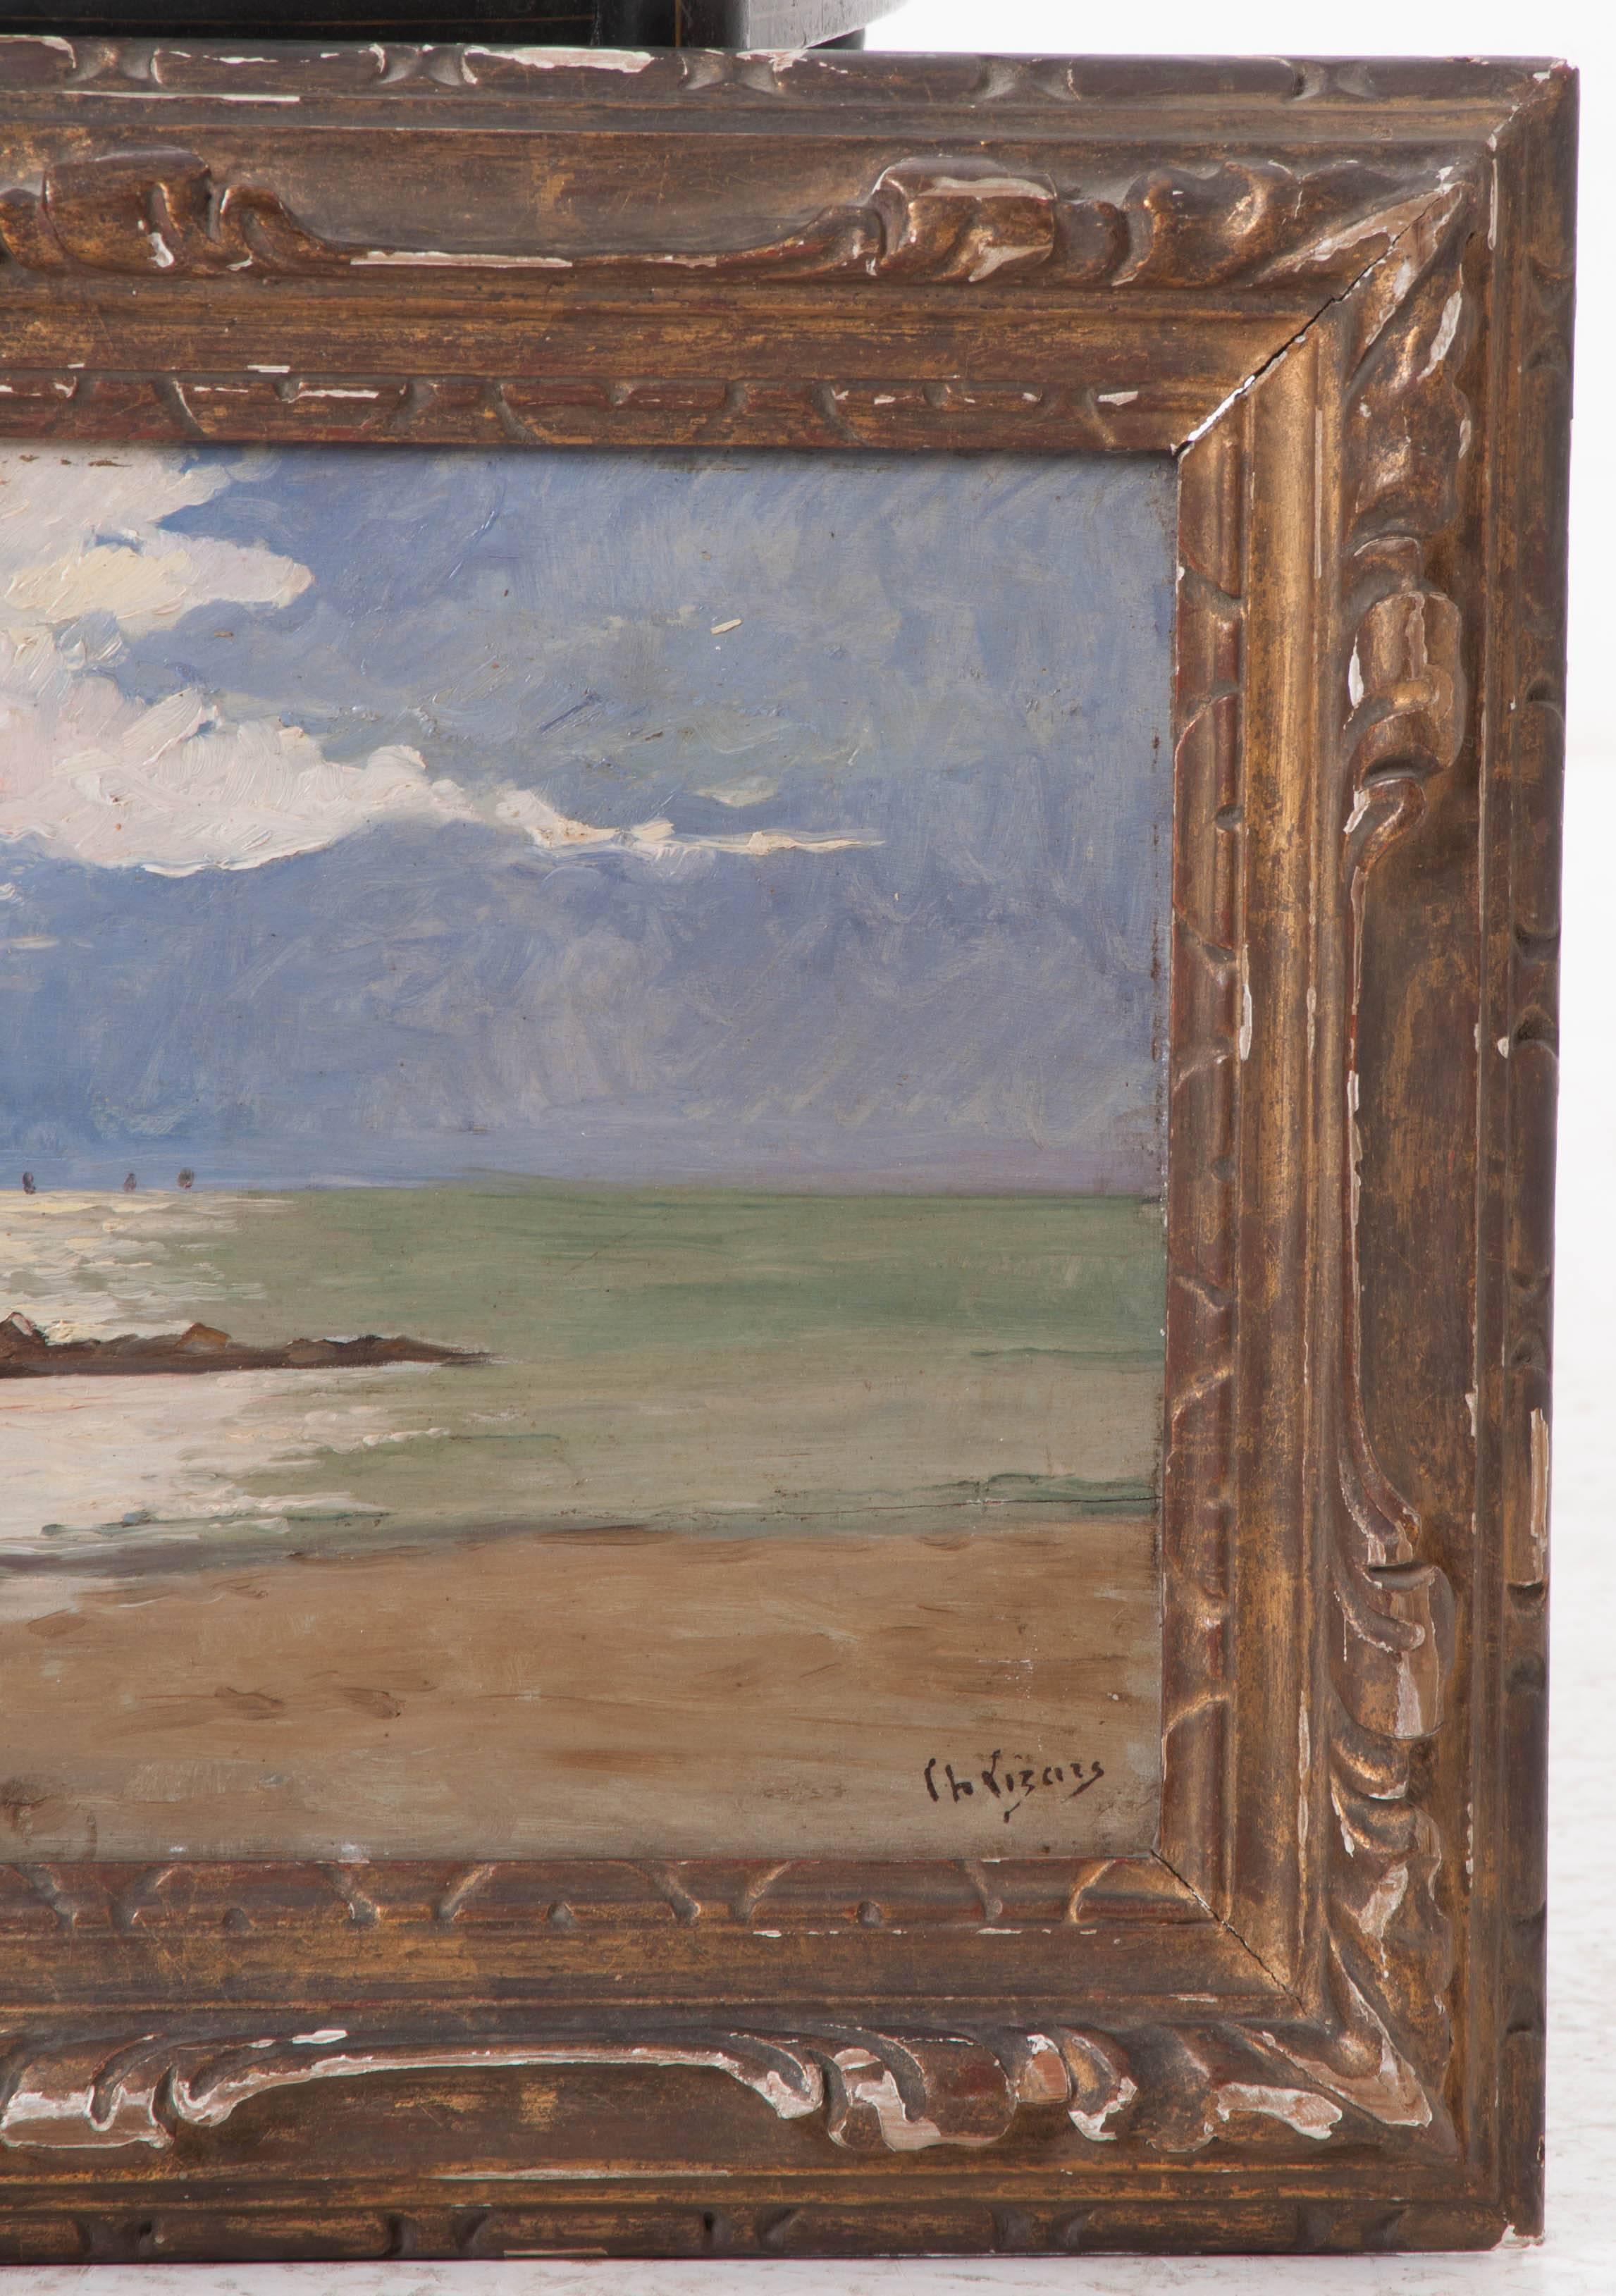 Oil on wood panel. Impressionist techniques can be seen in this antique French landscape. Capturing a tranquil beach scene, the artist uses small, visible brush strokes to create playful movement seen in the clouds and in the sun's reflection